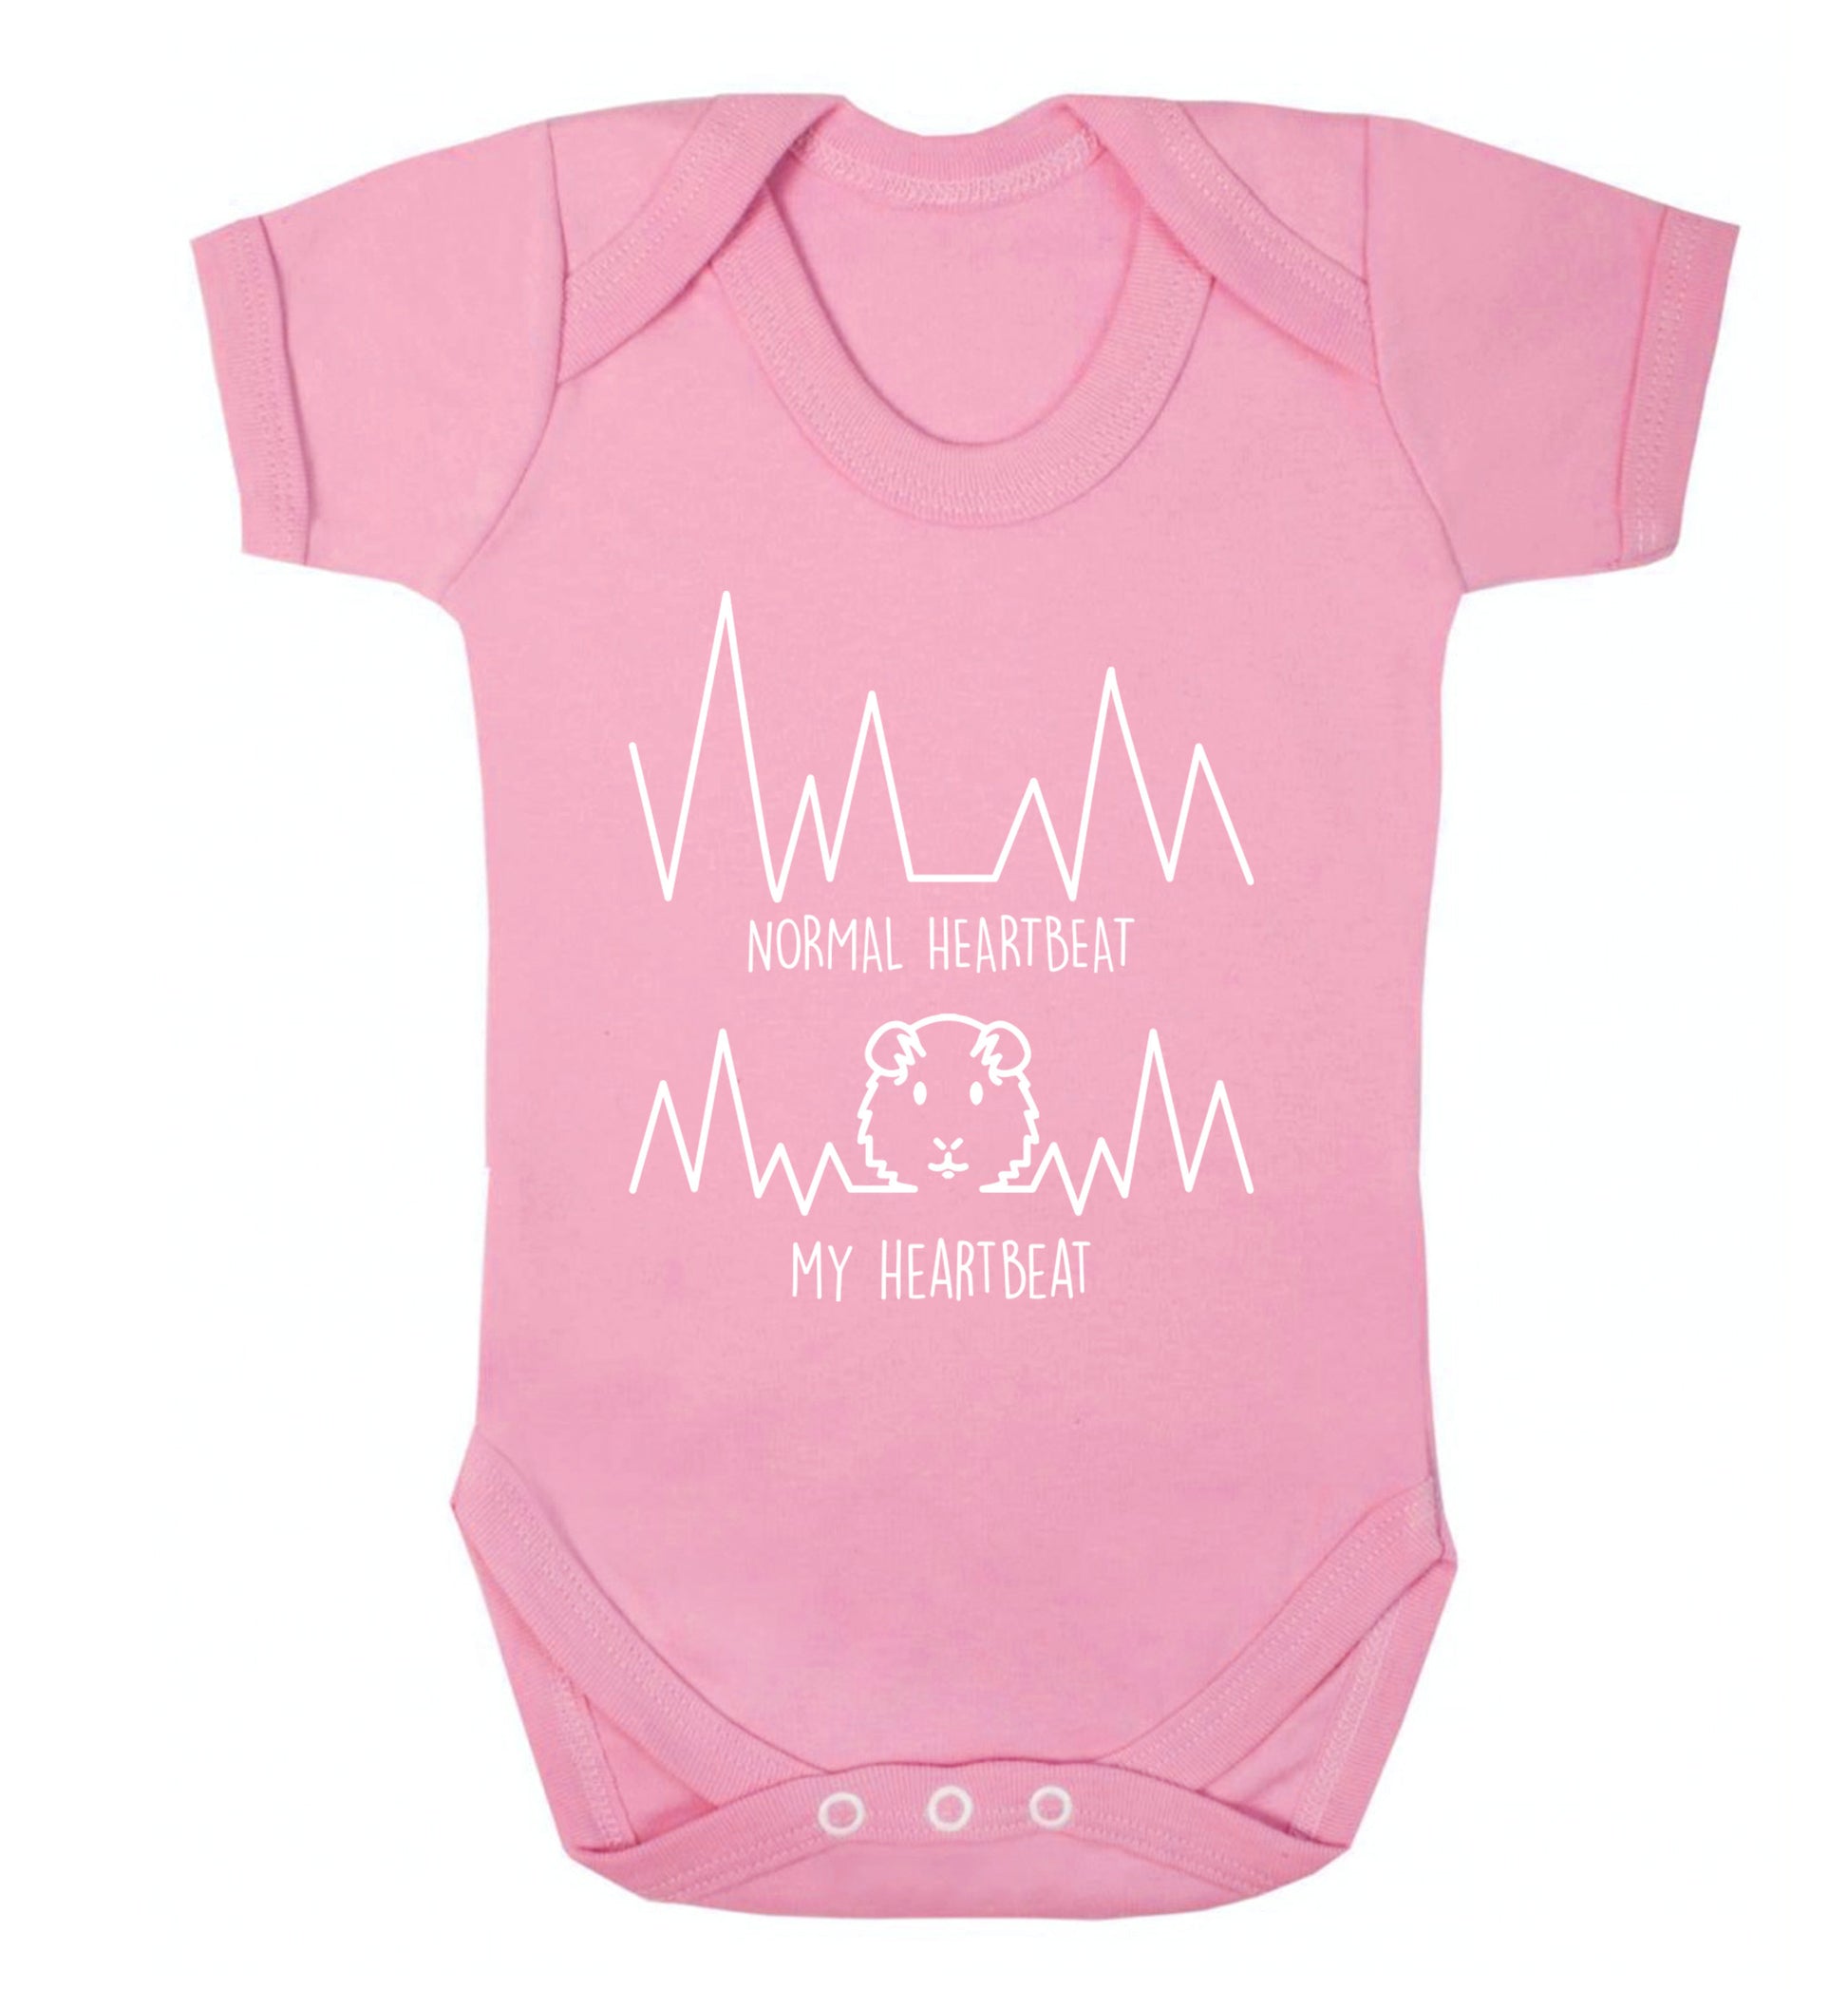 Normal heartbeat vs my heartbeat guinea pig lover Baby Vest pale pink 18-24 months